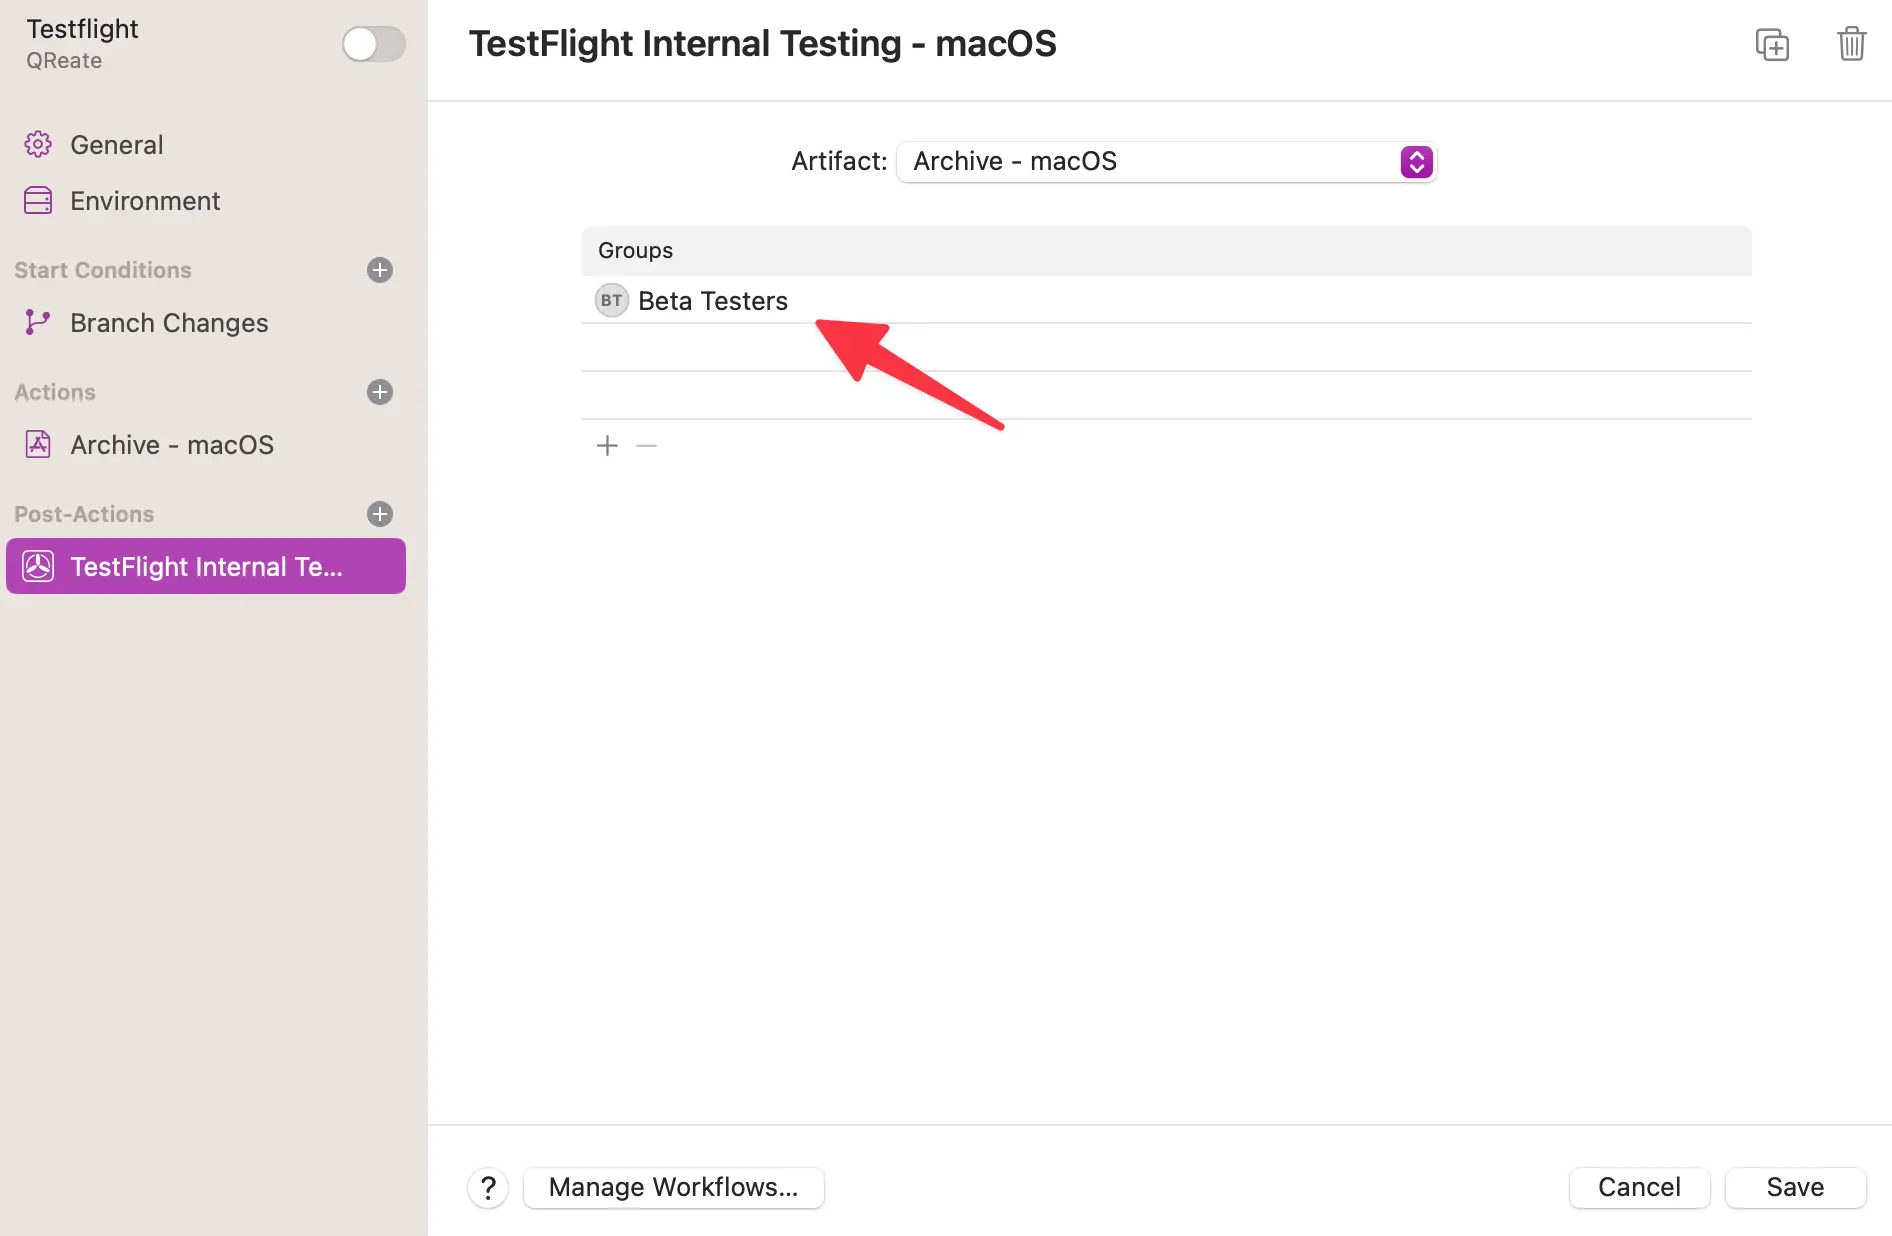 A post-action step to deliver the app to TestFlight and all internal testers